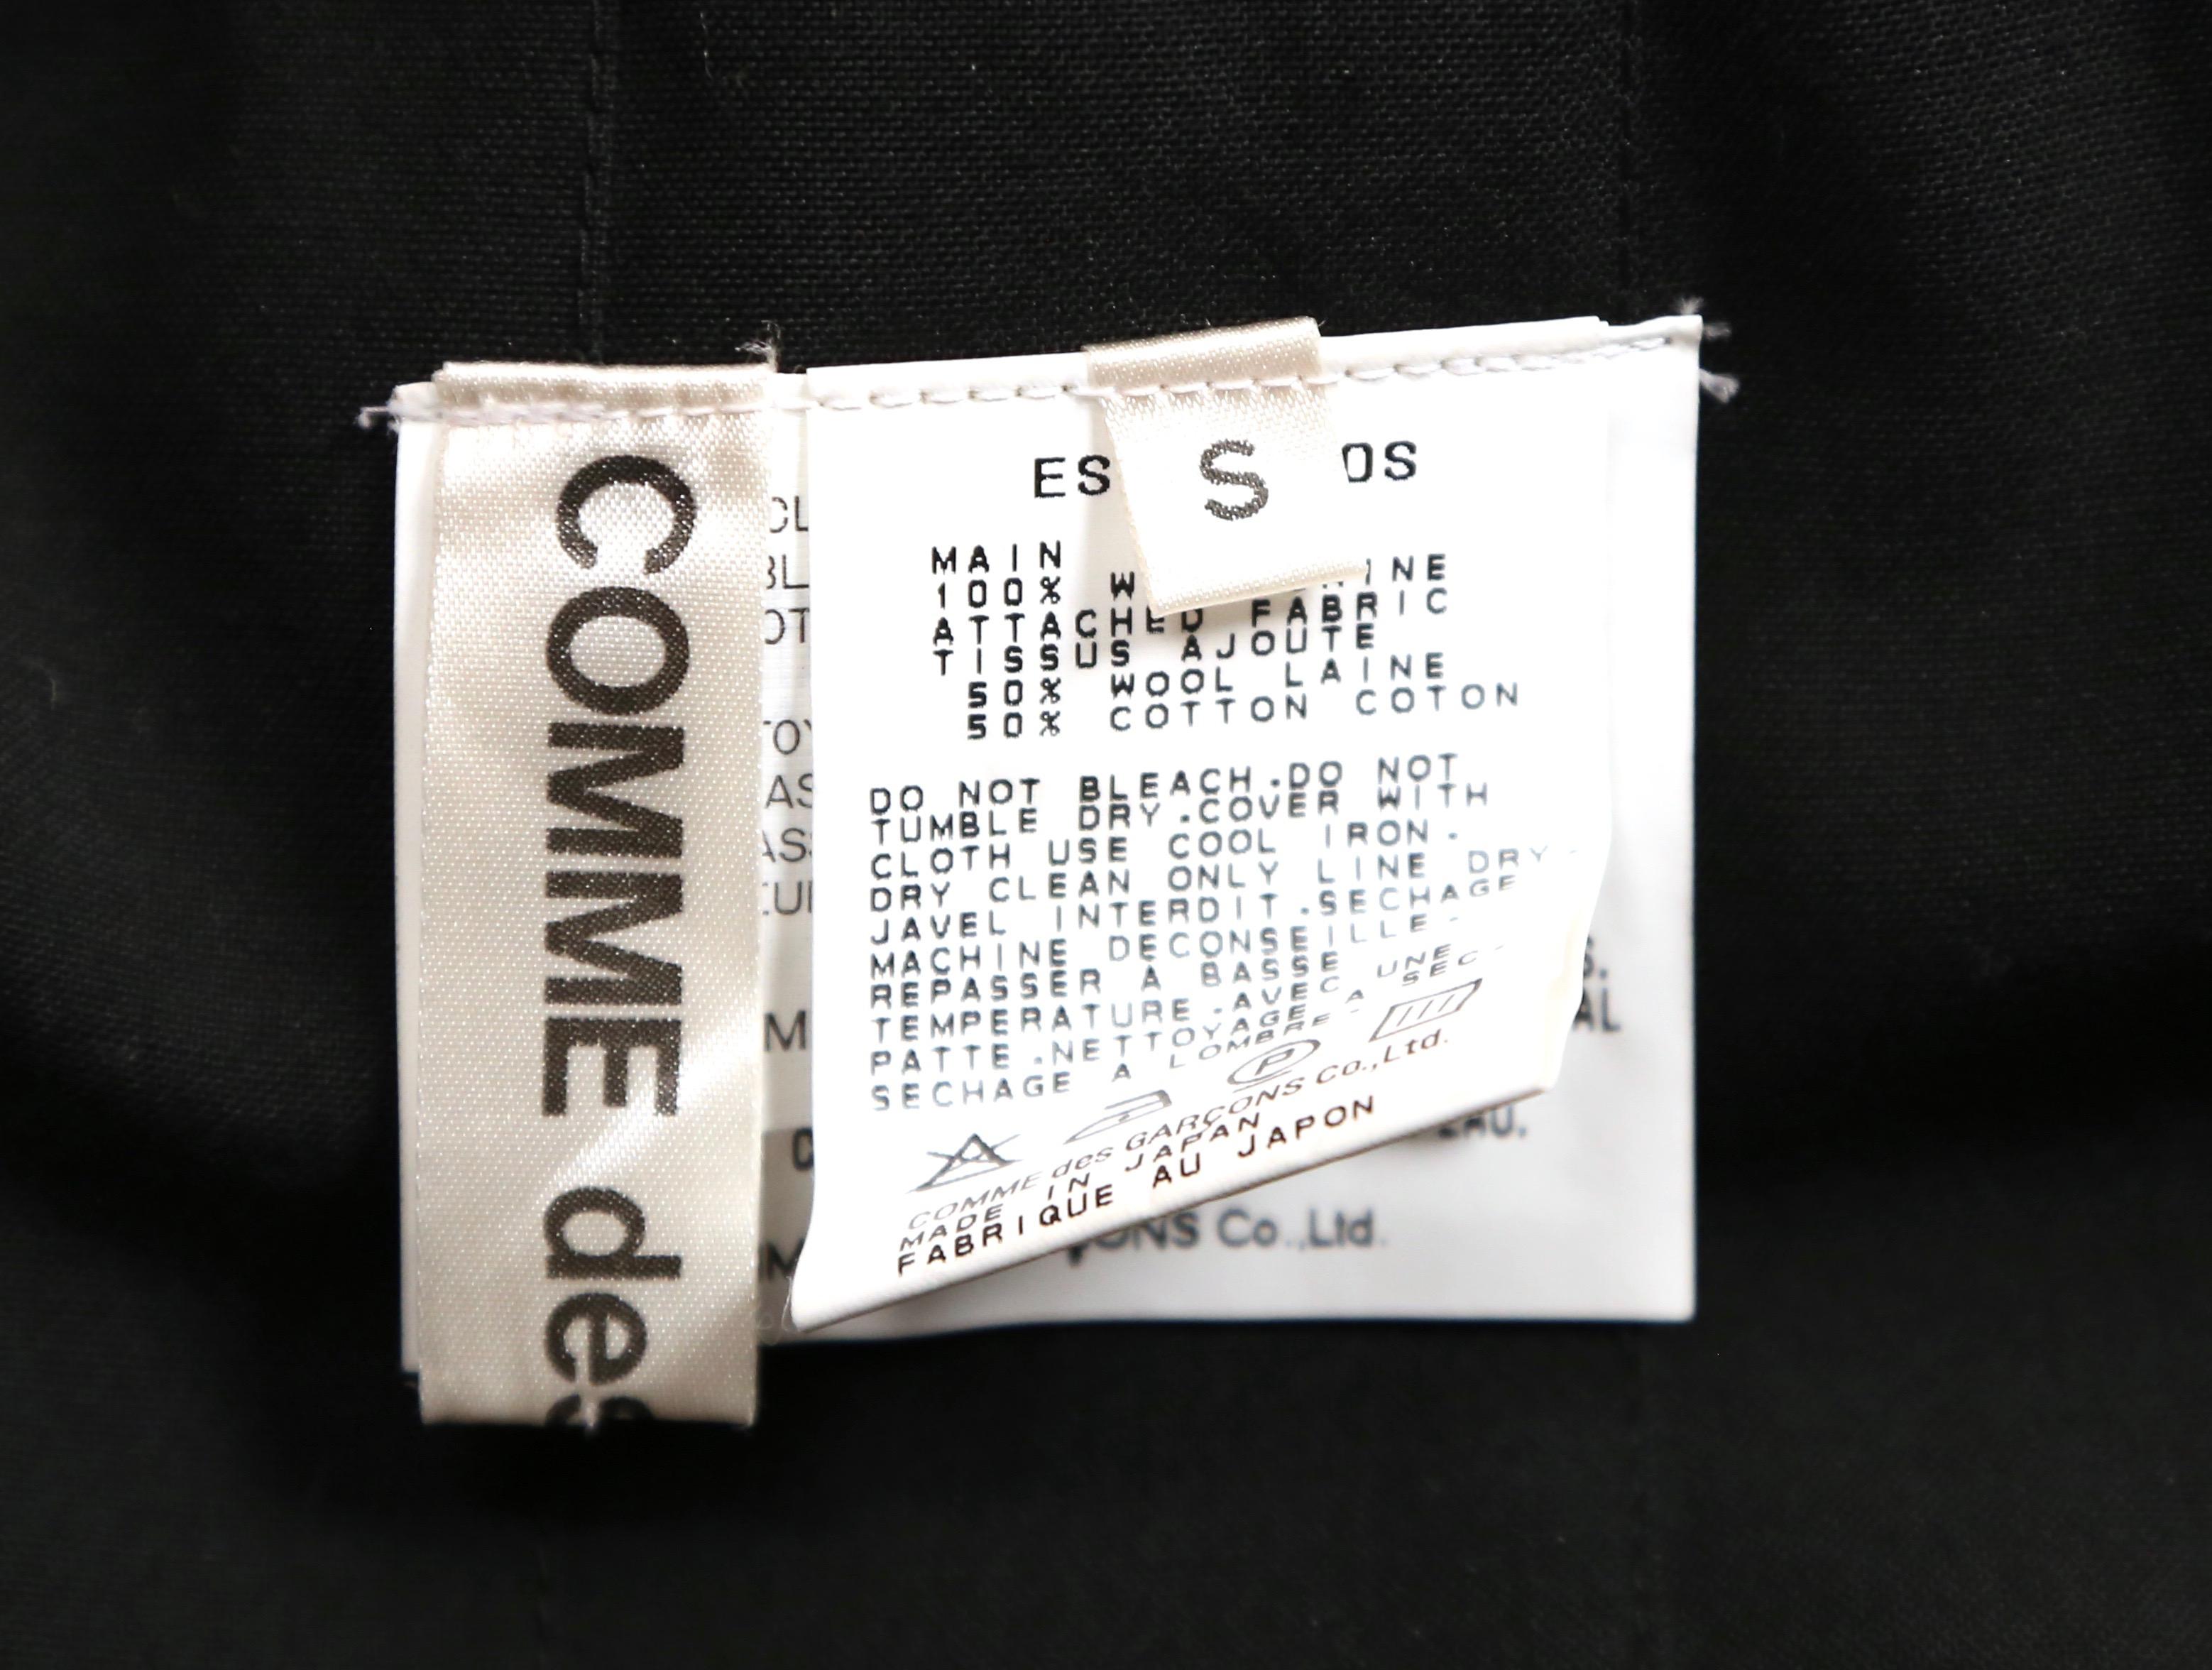 1998 COMME DES GARCONS 'FUSION' layered jacket and runway skirt For Sale 12